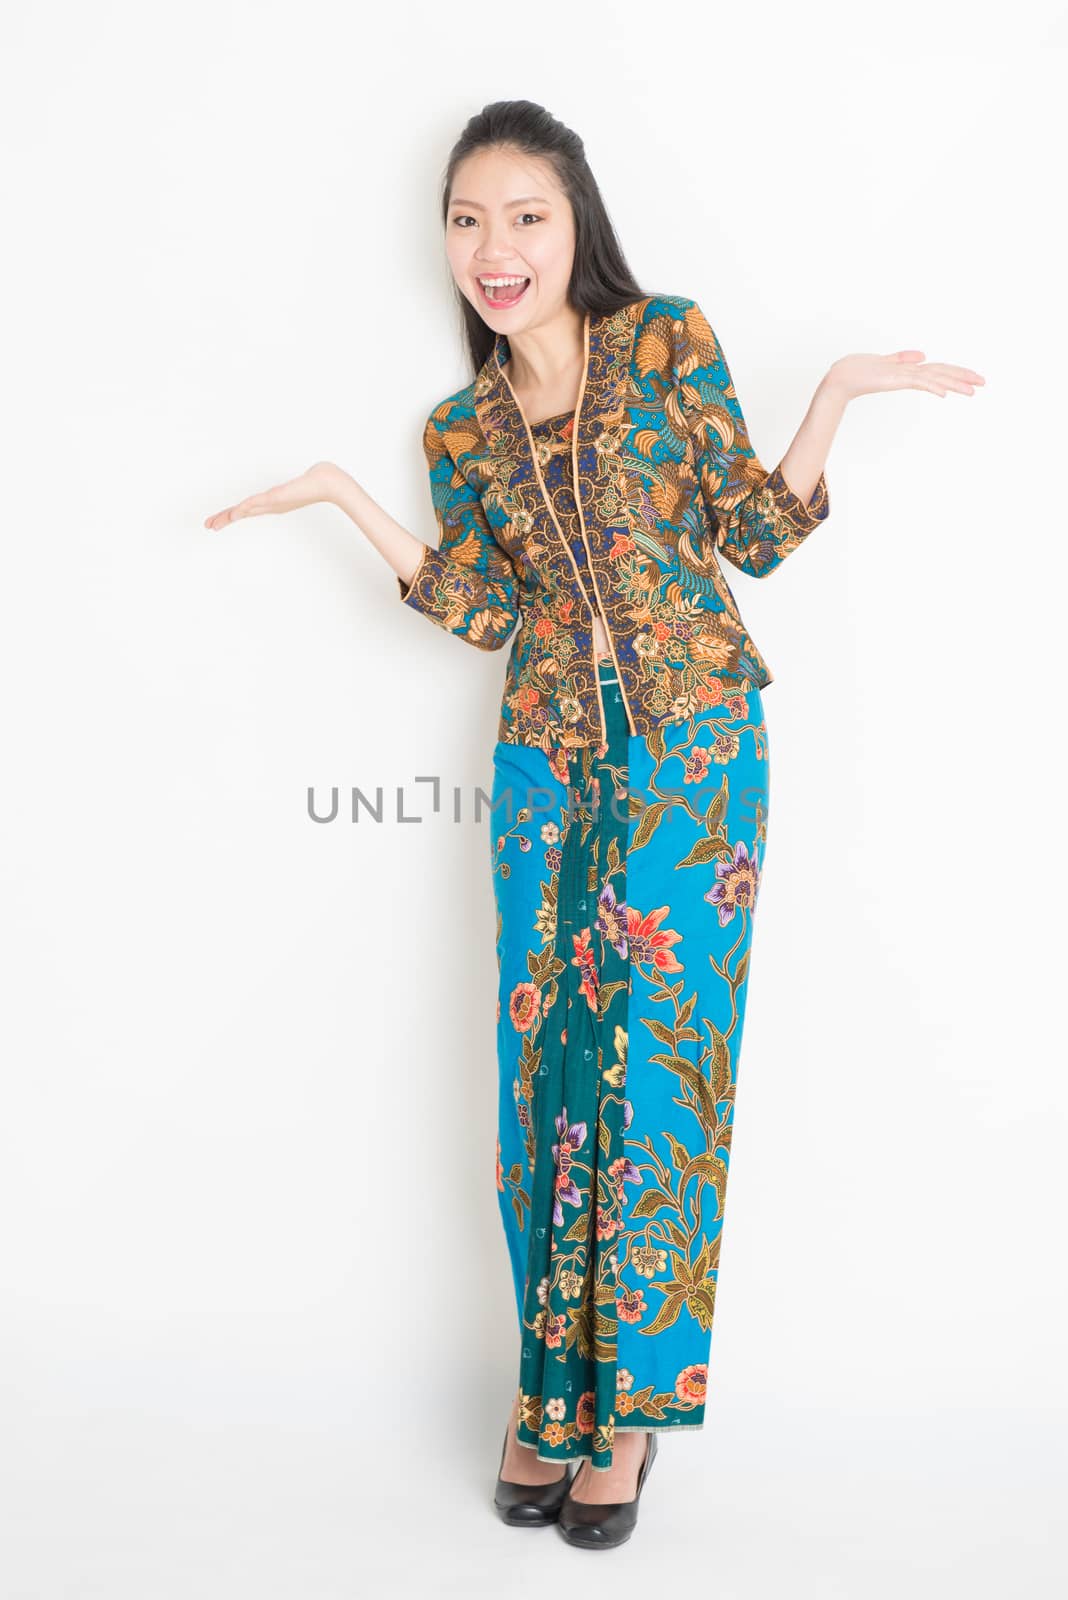 Full body portrait of cheerful Southeast Asian woman in batik dress hands showing something, standing on plain background.